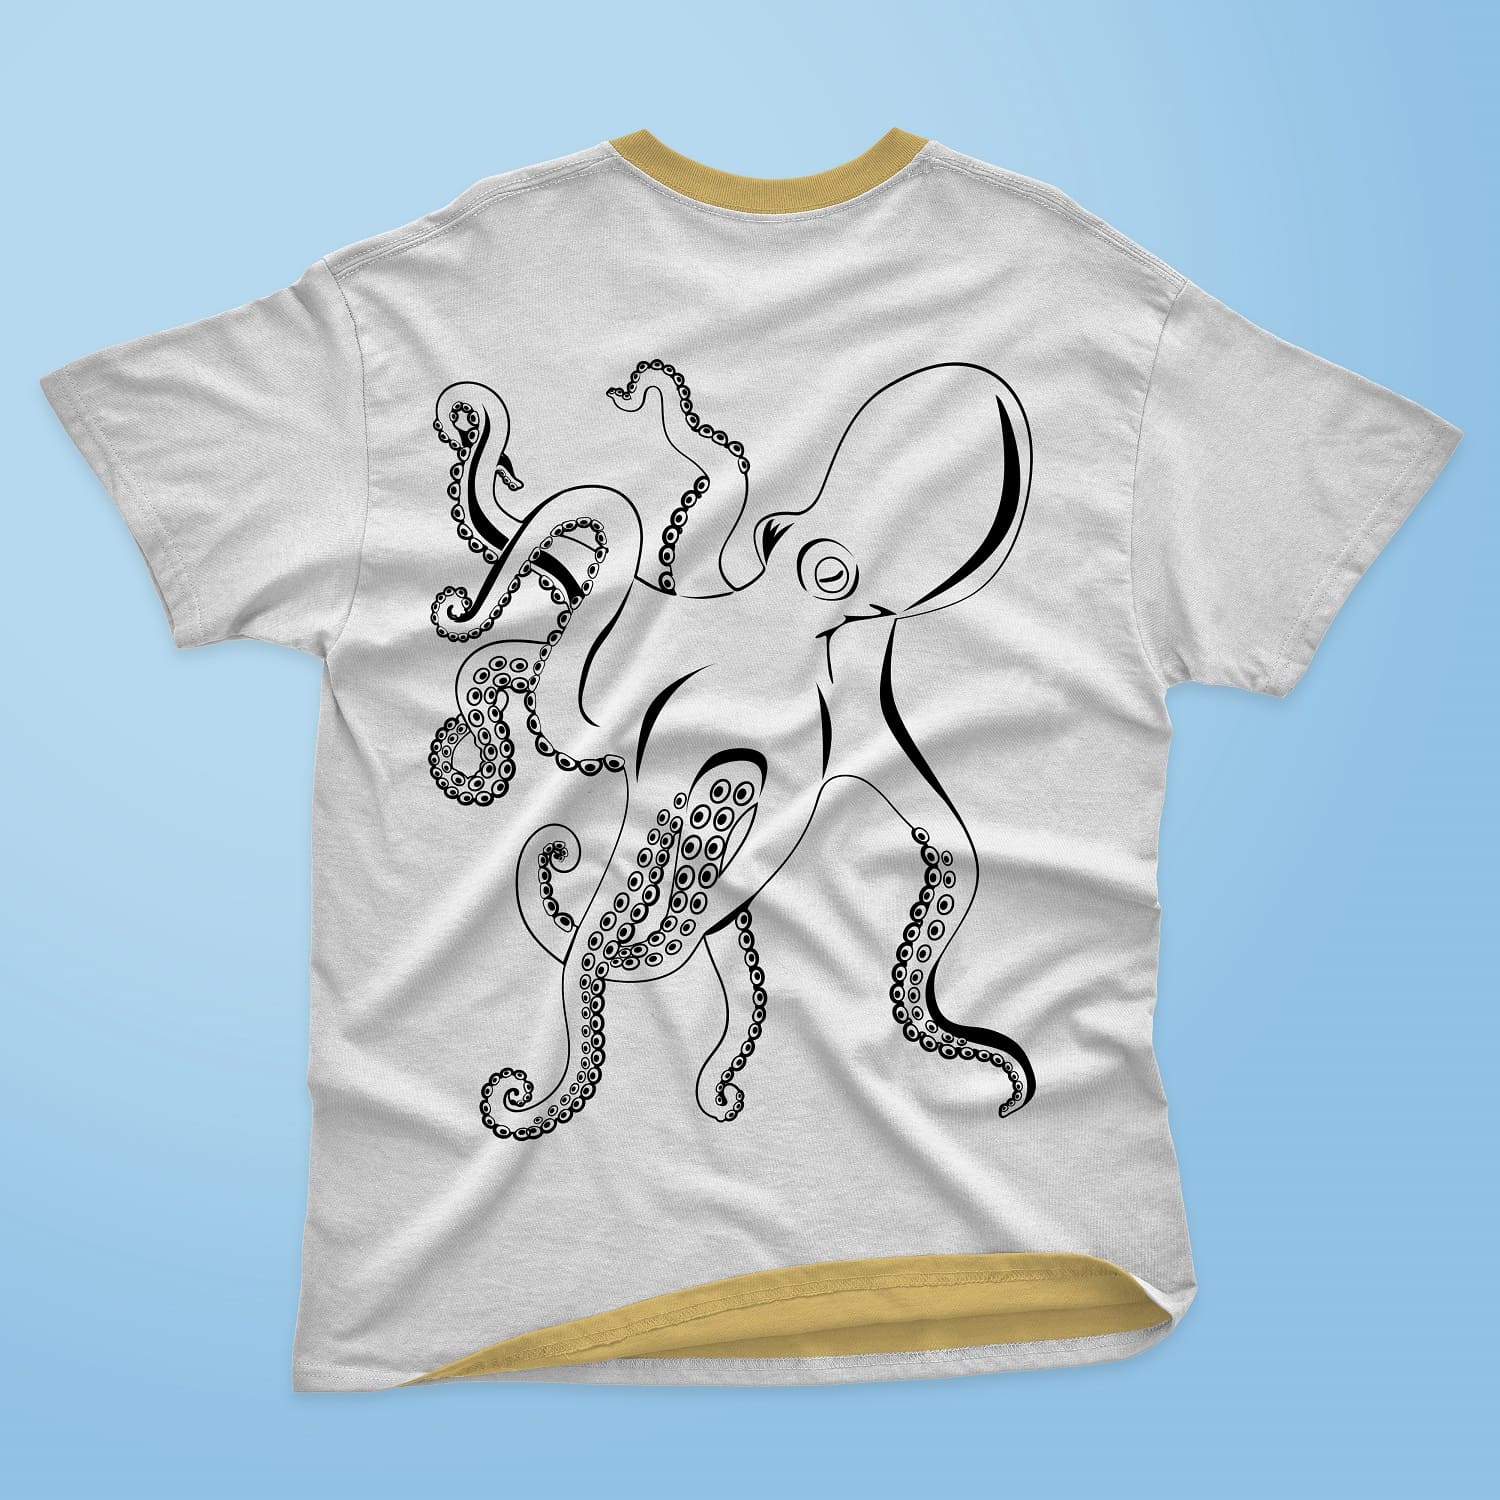 White T-shirt with an image of a transparent octopus with an oblong head.